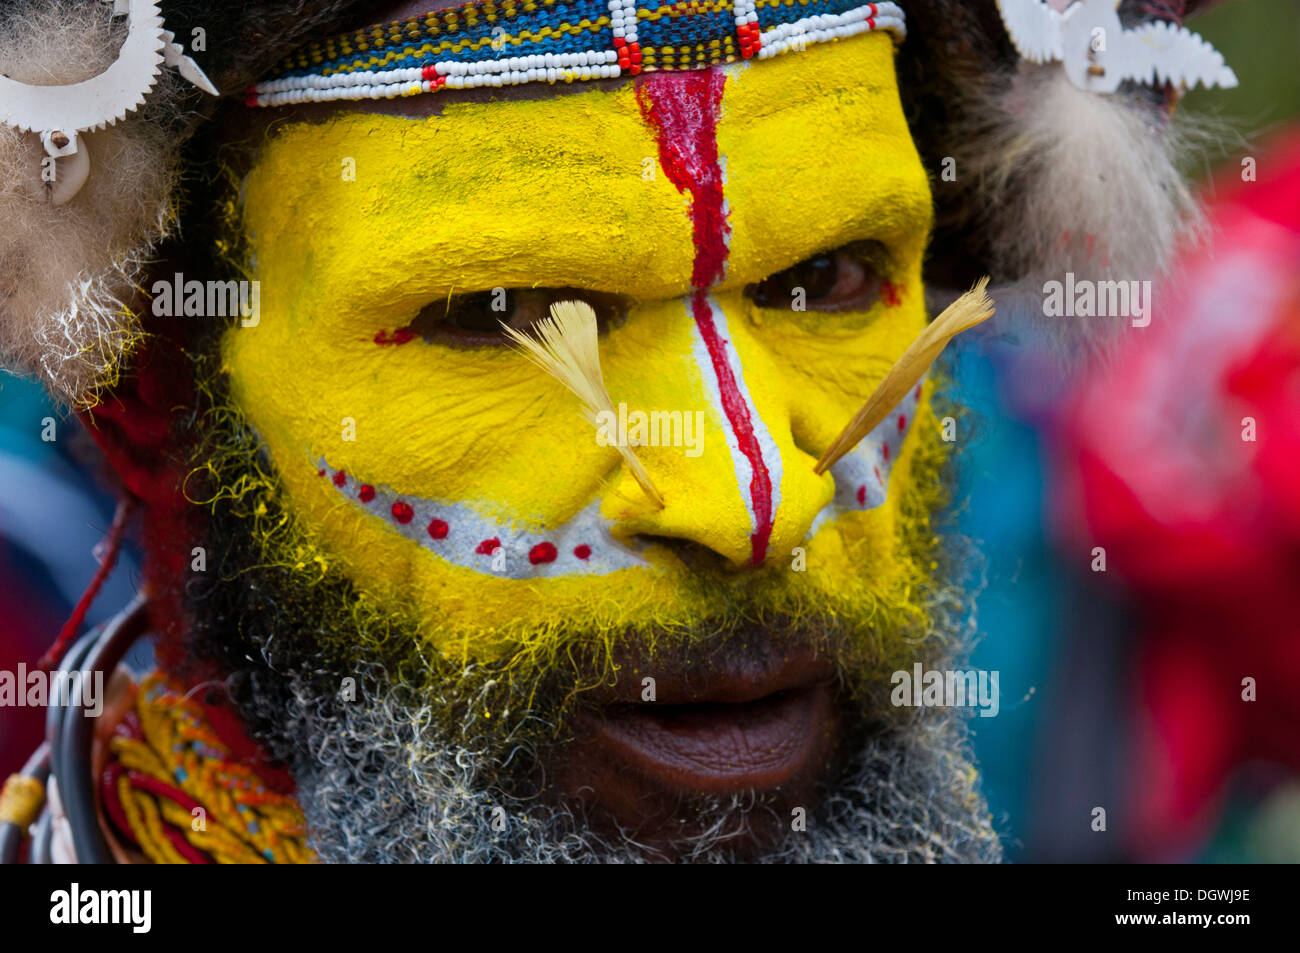 Man in a colourfully decorated costume with face paint is celebrating at the traditional Sing Sing gathering in the highlands Stock Photo